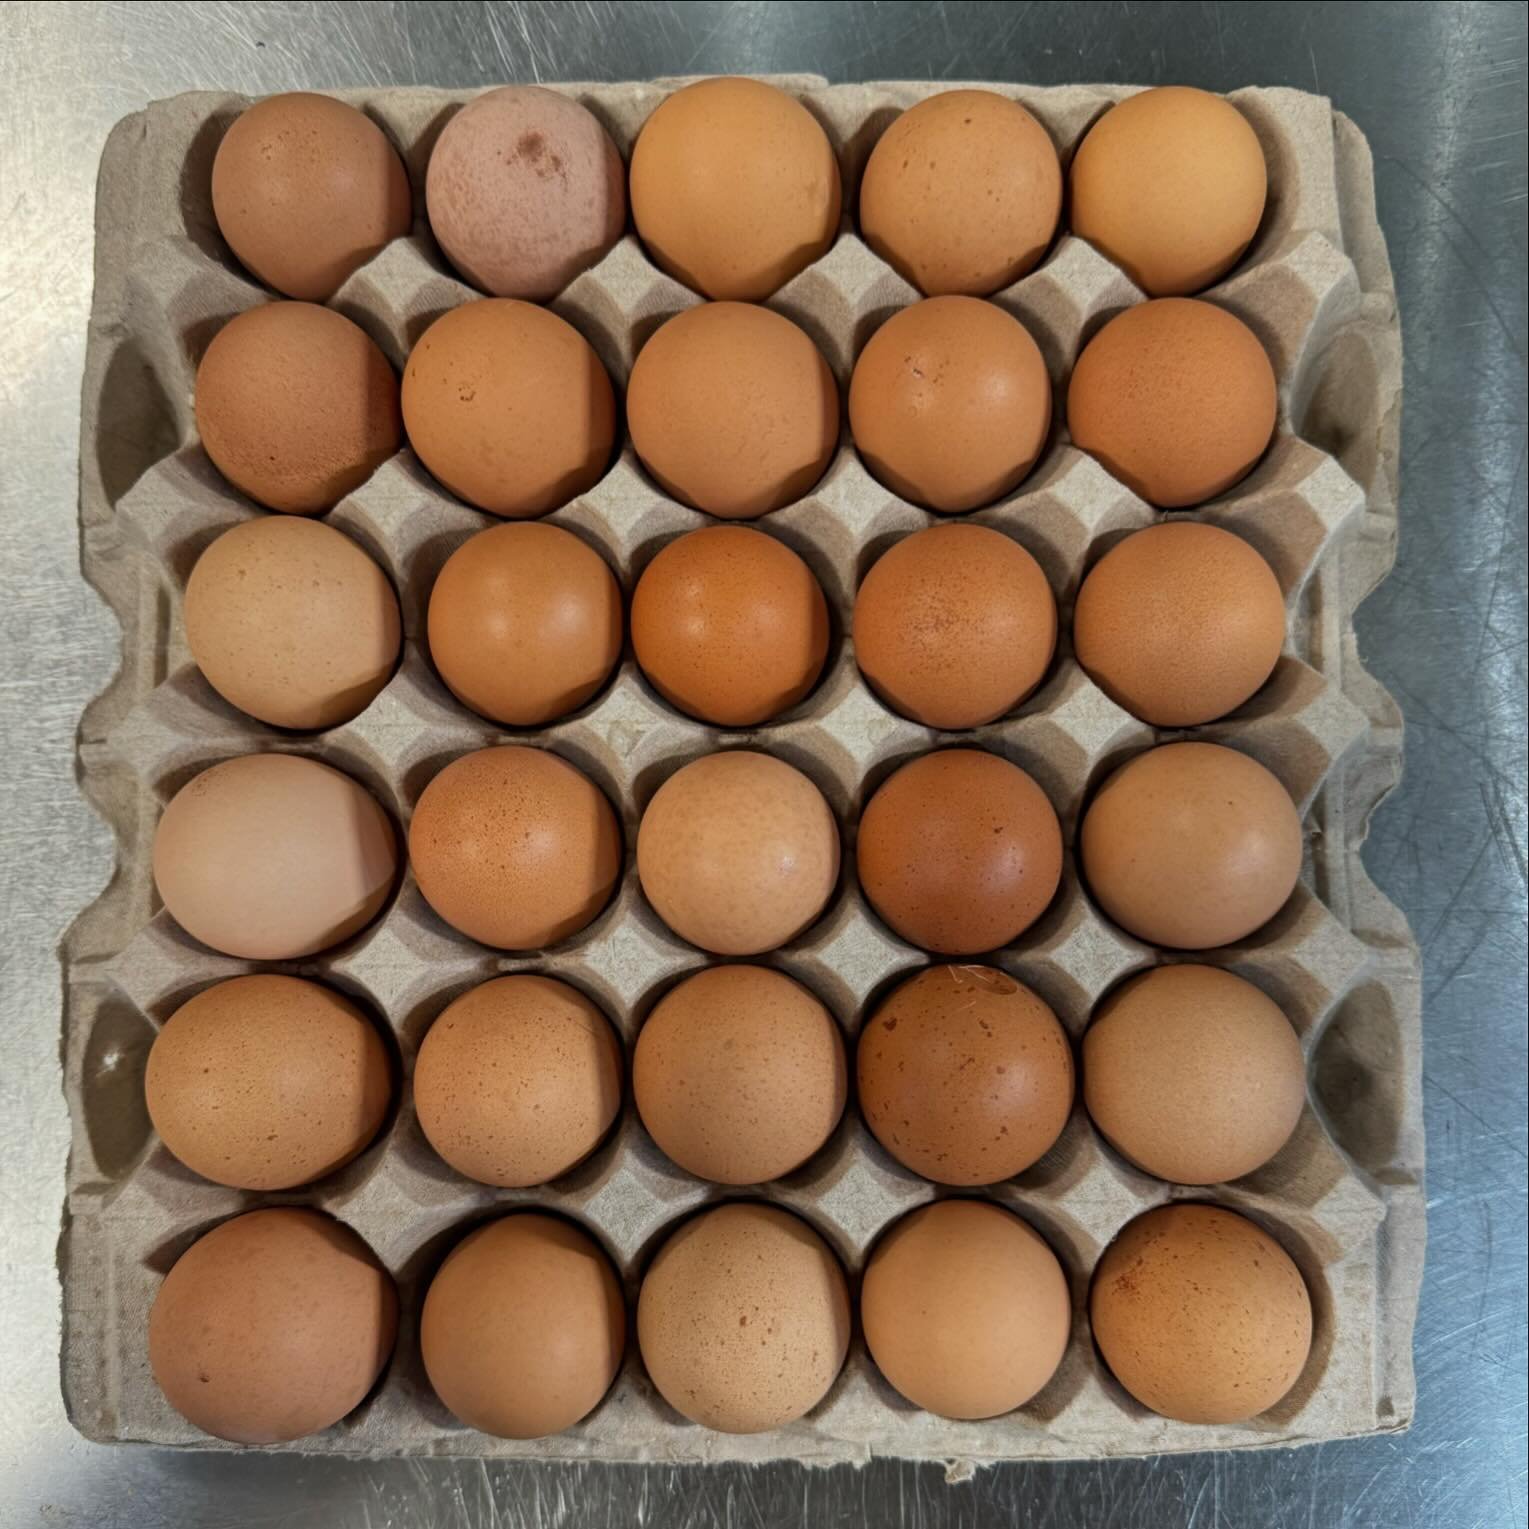 Welcome our new edition&hellip;
Eggs from @sequatchiecovefarm 😍